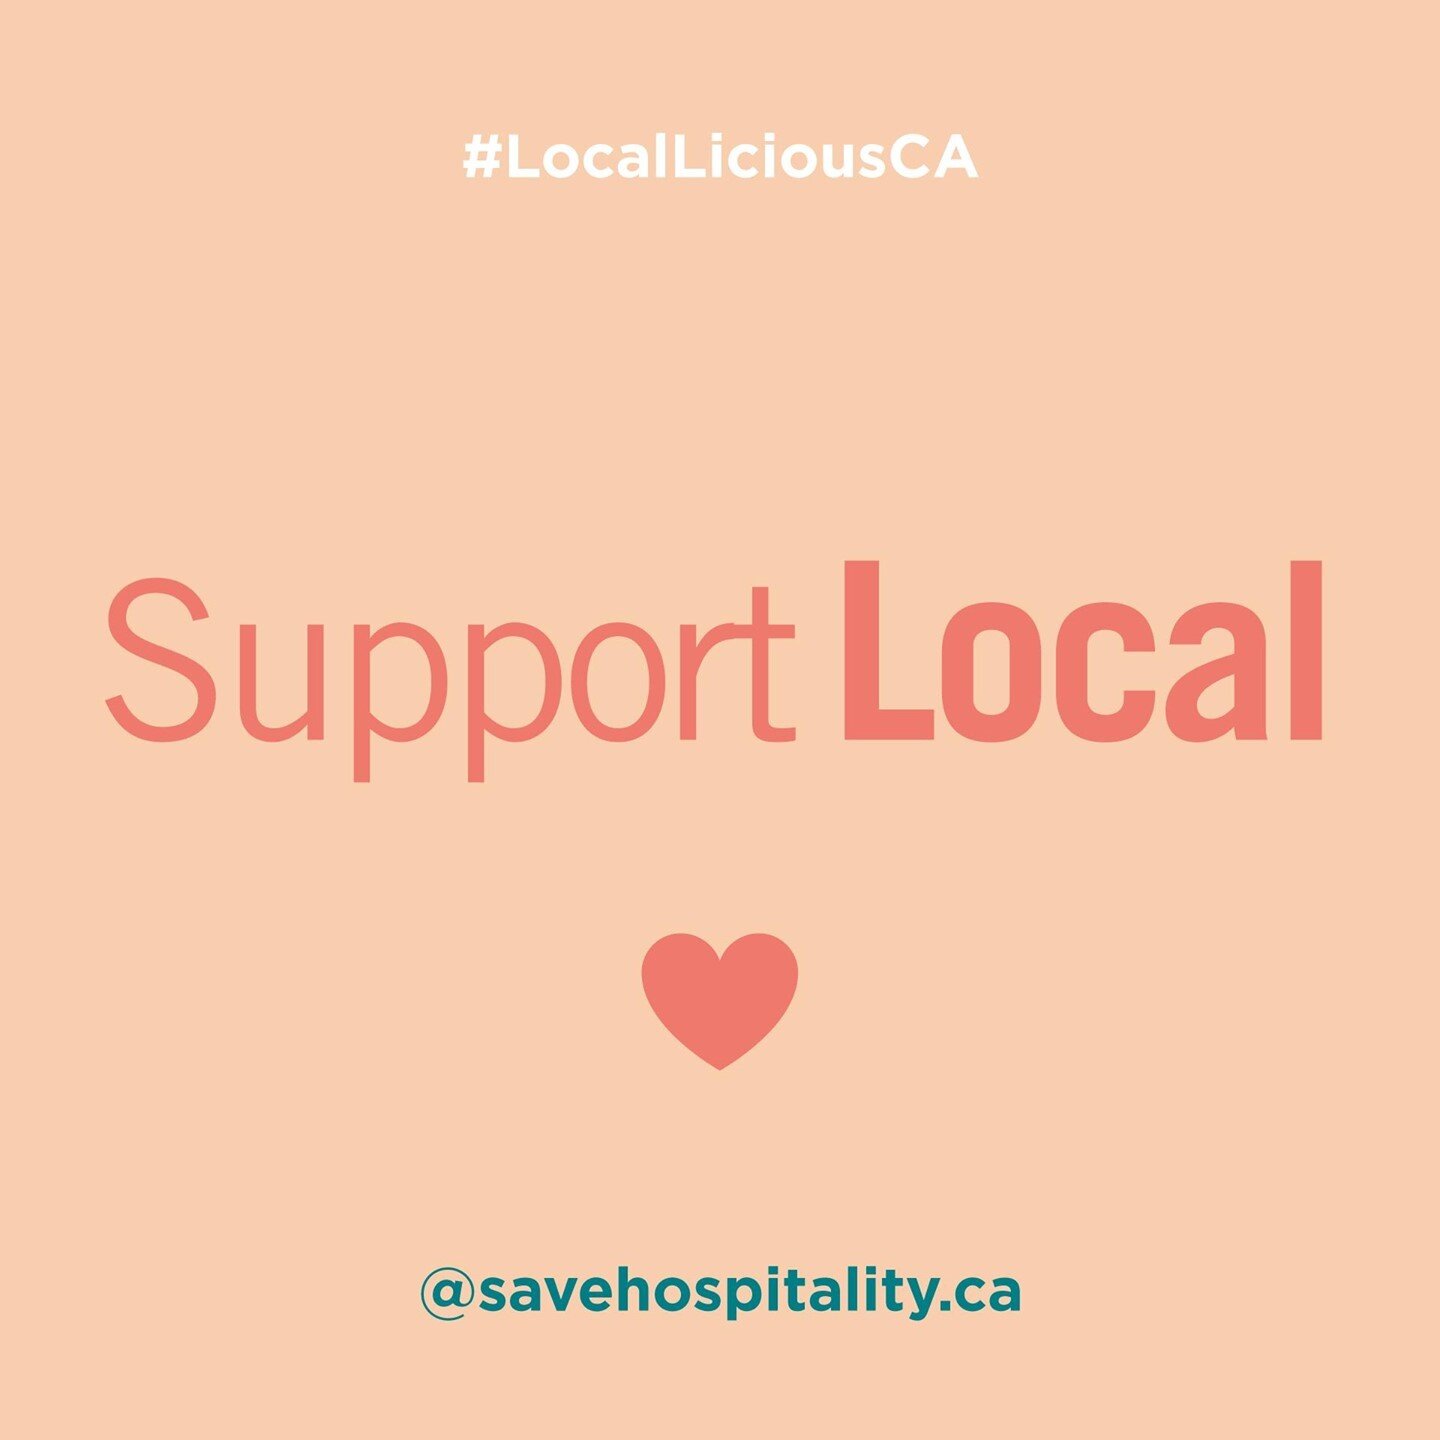 Join forces and buy three courses!

#LocalLiciousCA is officially underway. From now until March 7, we will be offering a three-course prix fixe menu, with $1 from every menu sold going to @the.fullplate! Support your local restaurants and #SaveHospi